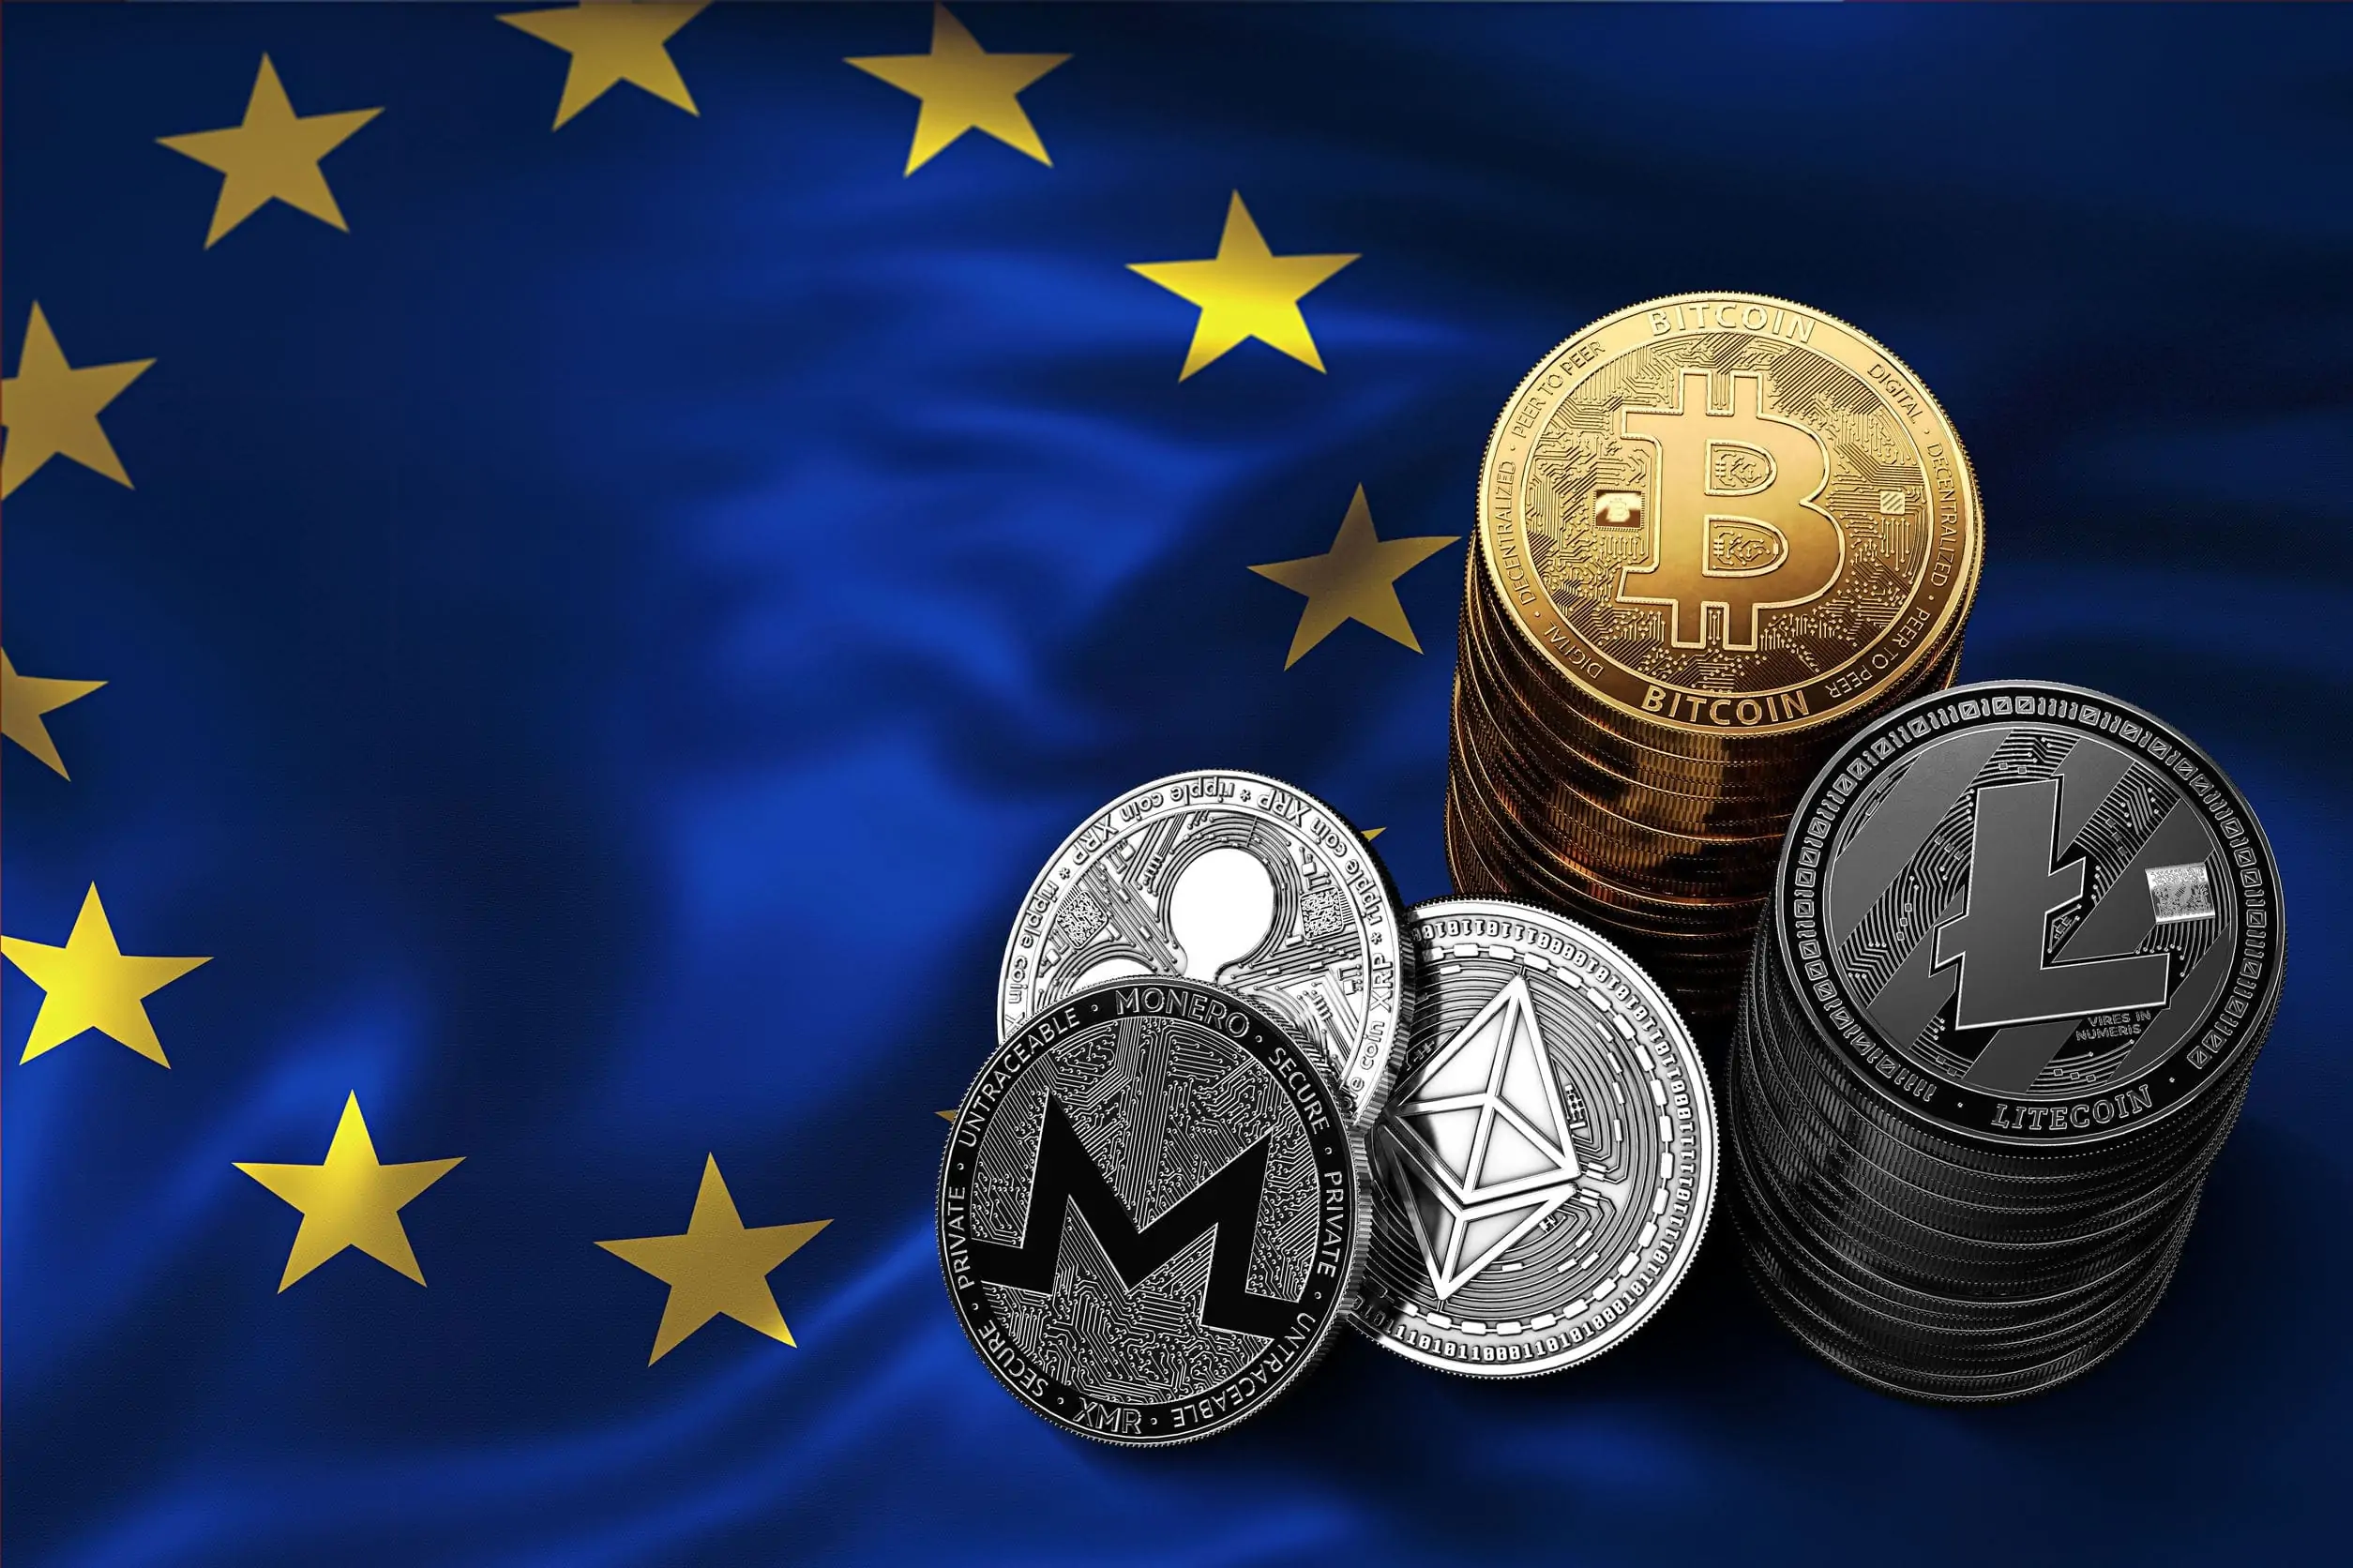 The EU commissioner appeals for global crypto regulatory coordination